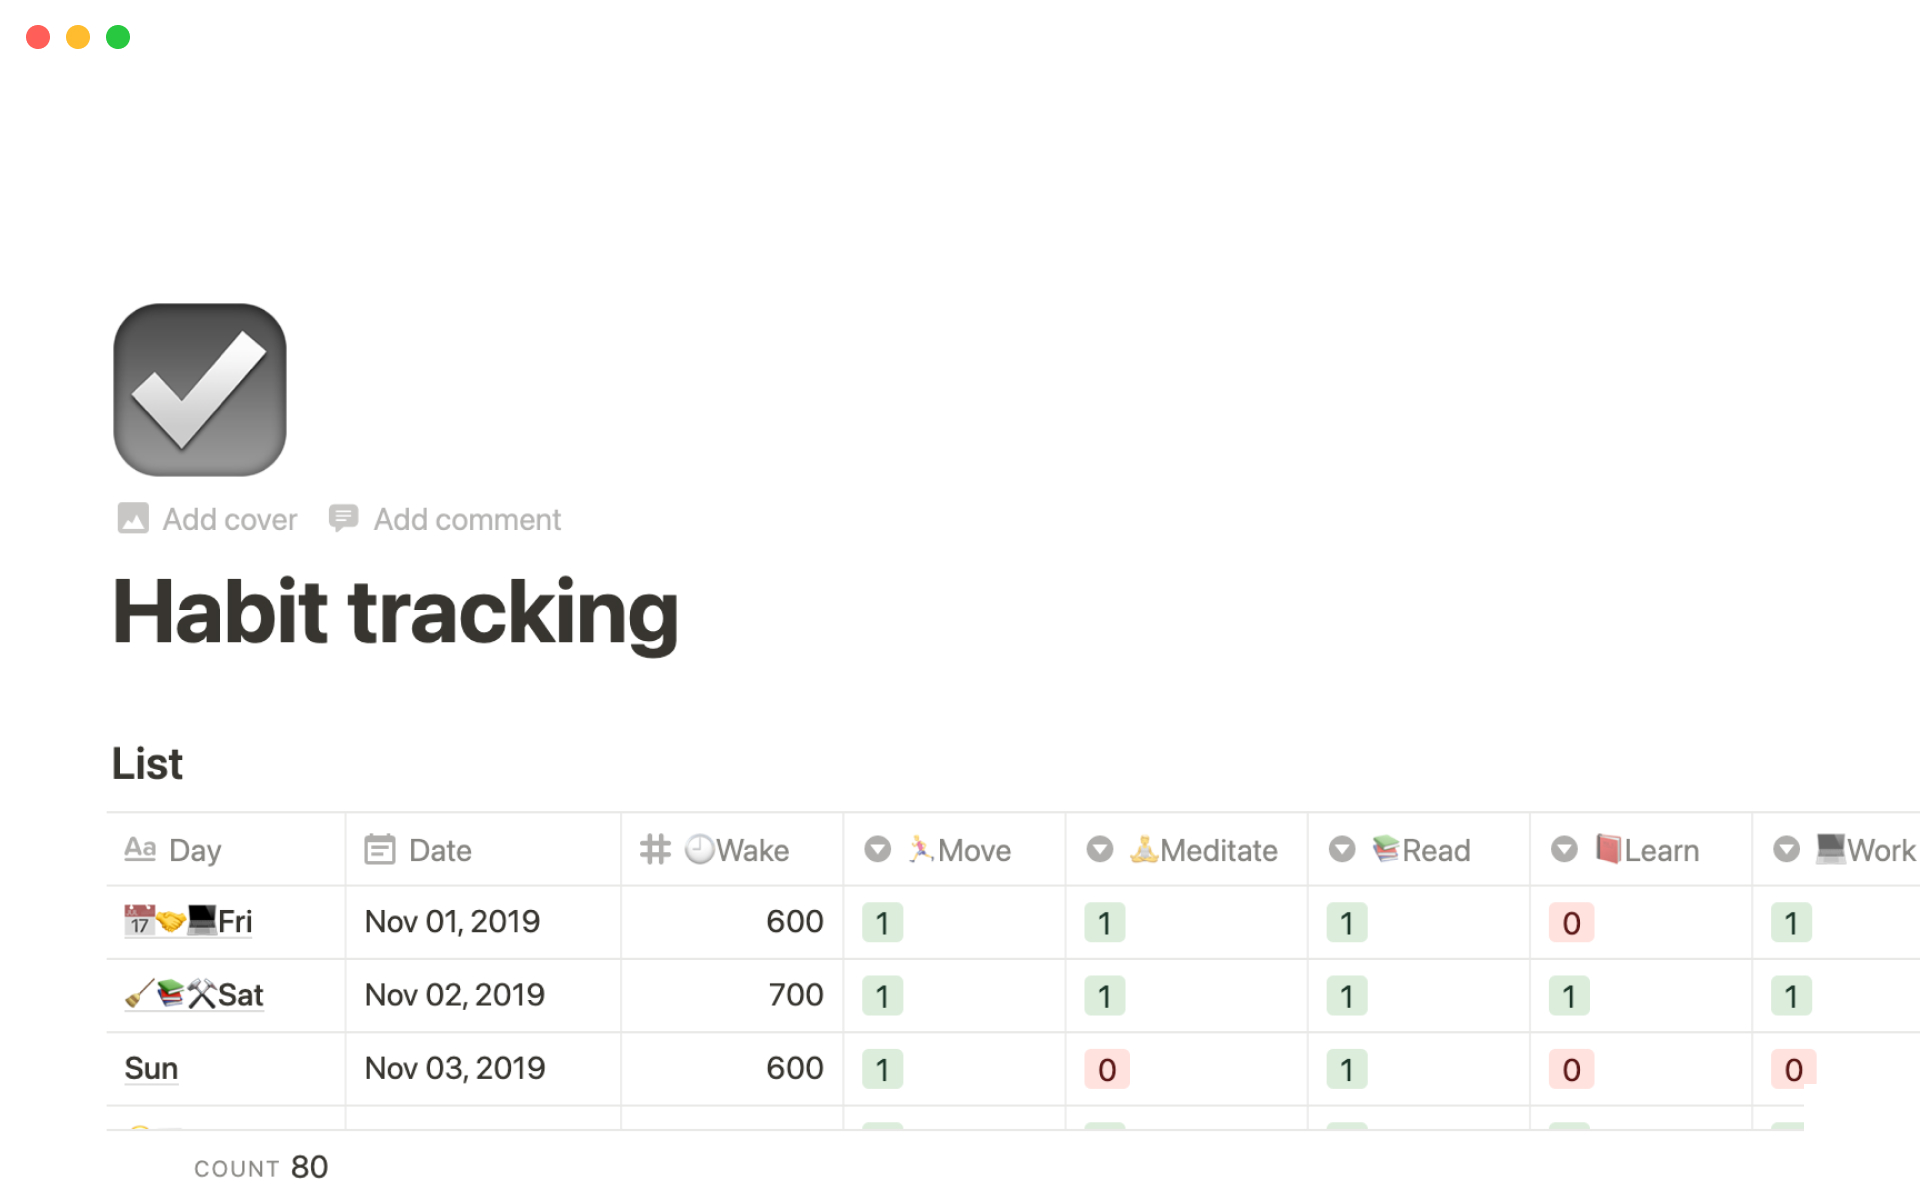 The desktop image for the Habit tracking template